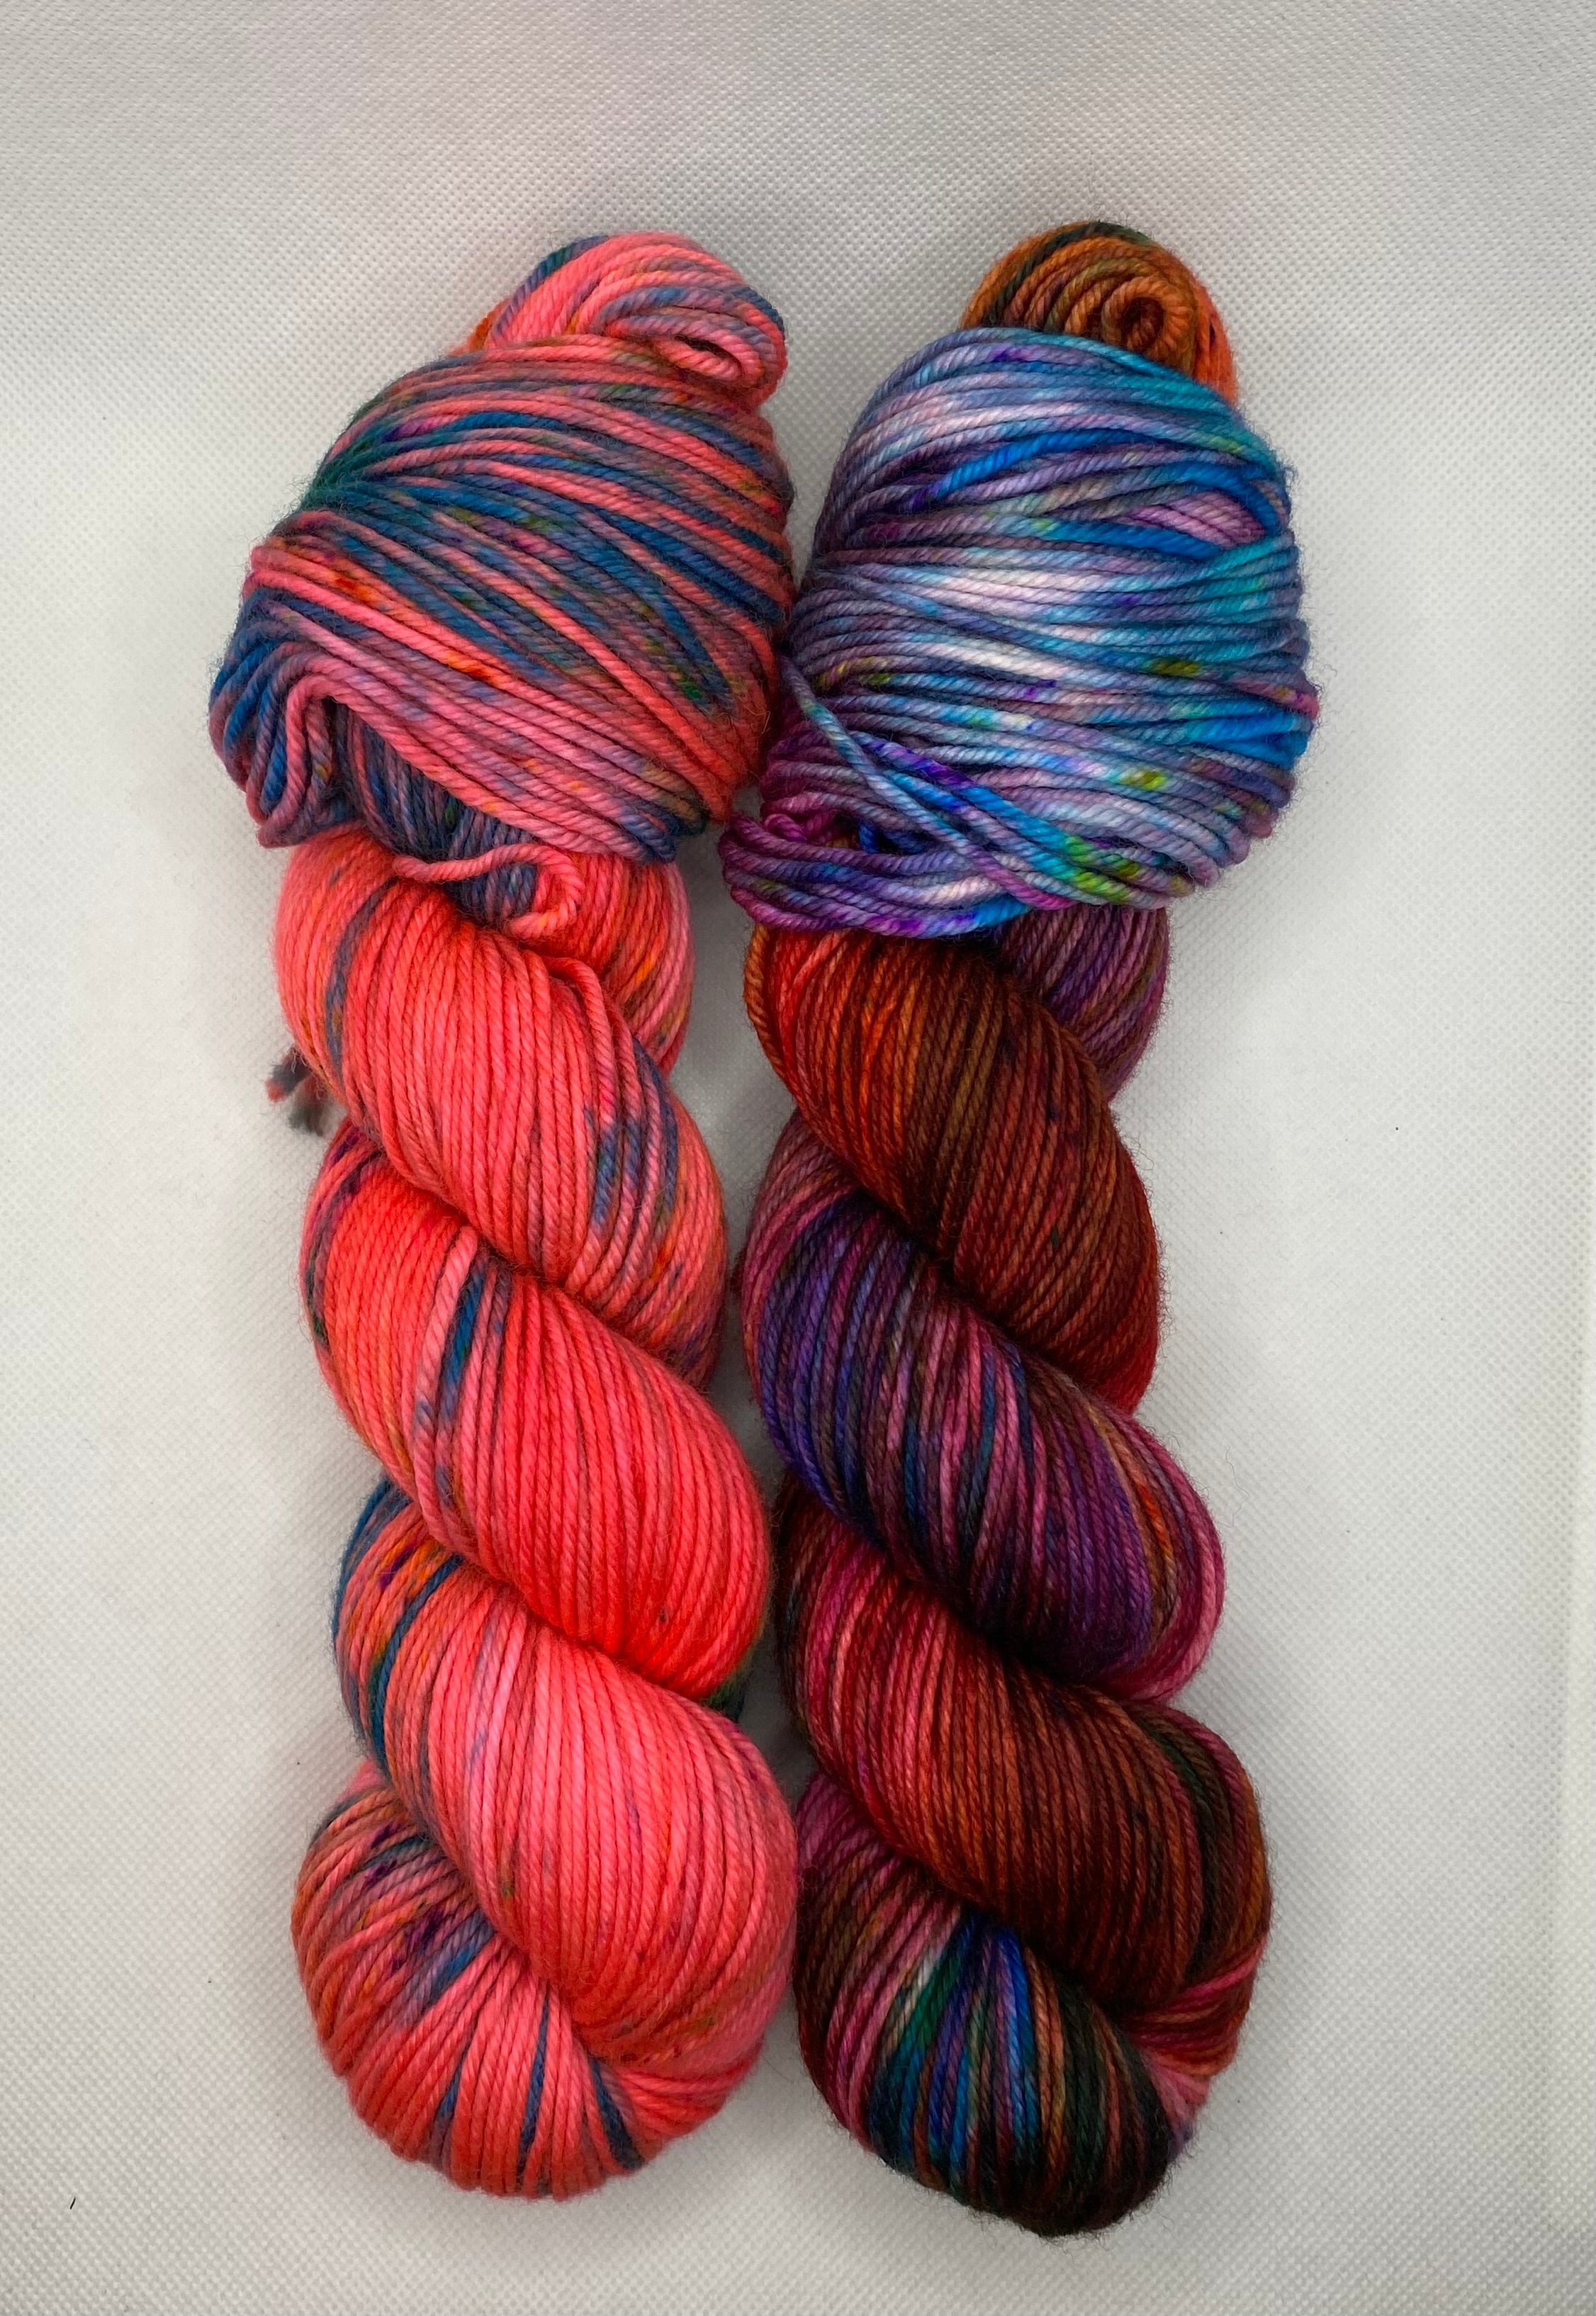 2 Skein Matching Set: DK “Neon Red and Maroon Variegated” Hand Dyed Yarn